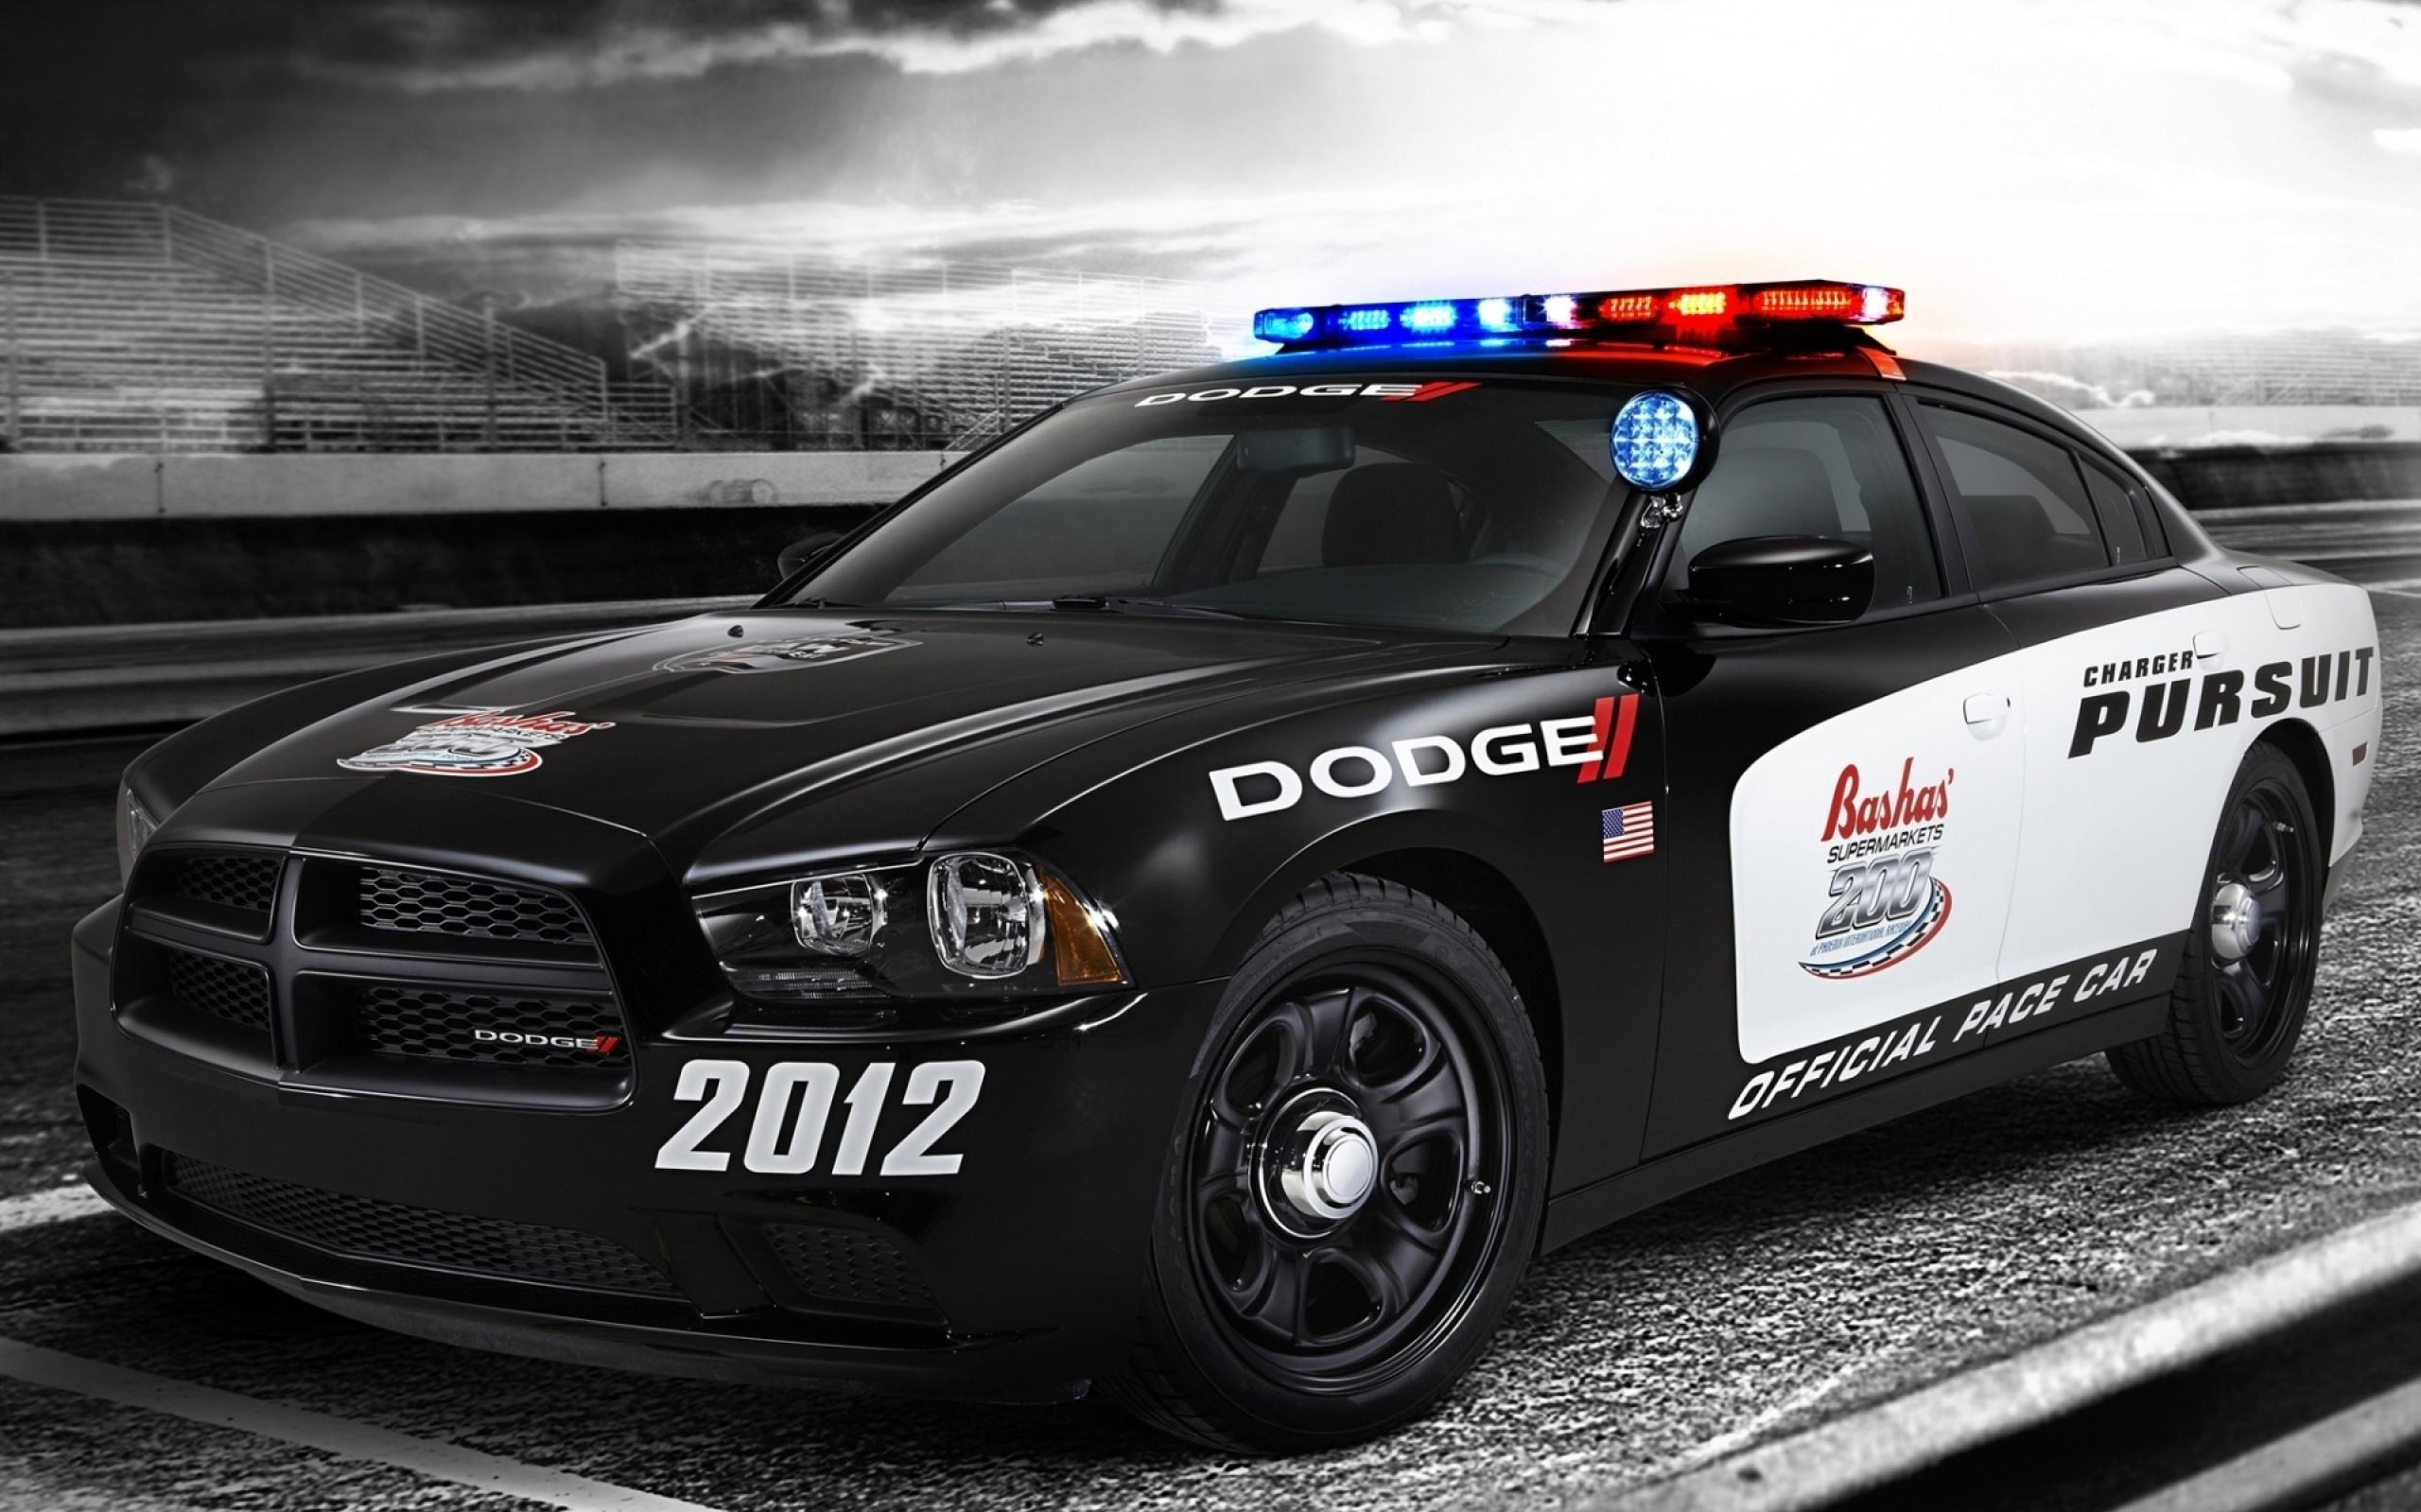 Free download Police Car Wallpapers [2560x1600] for your Desktop